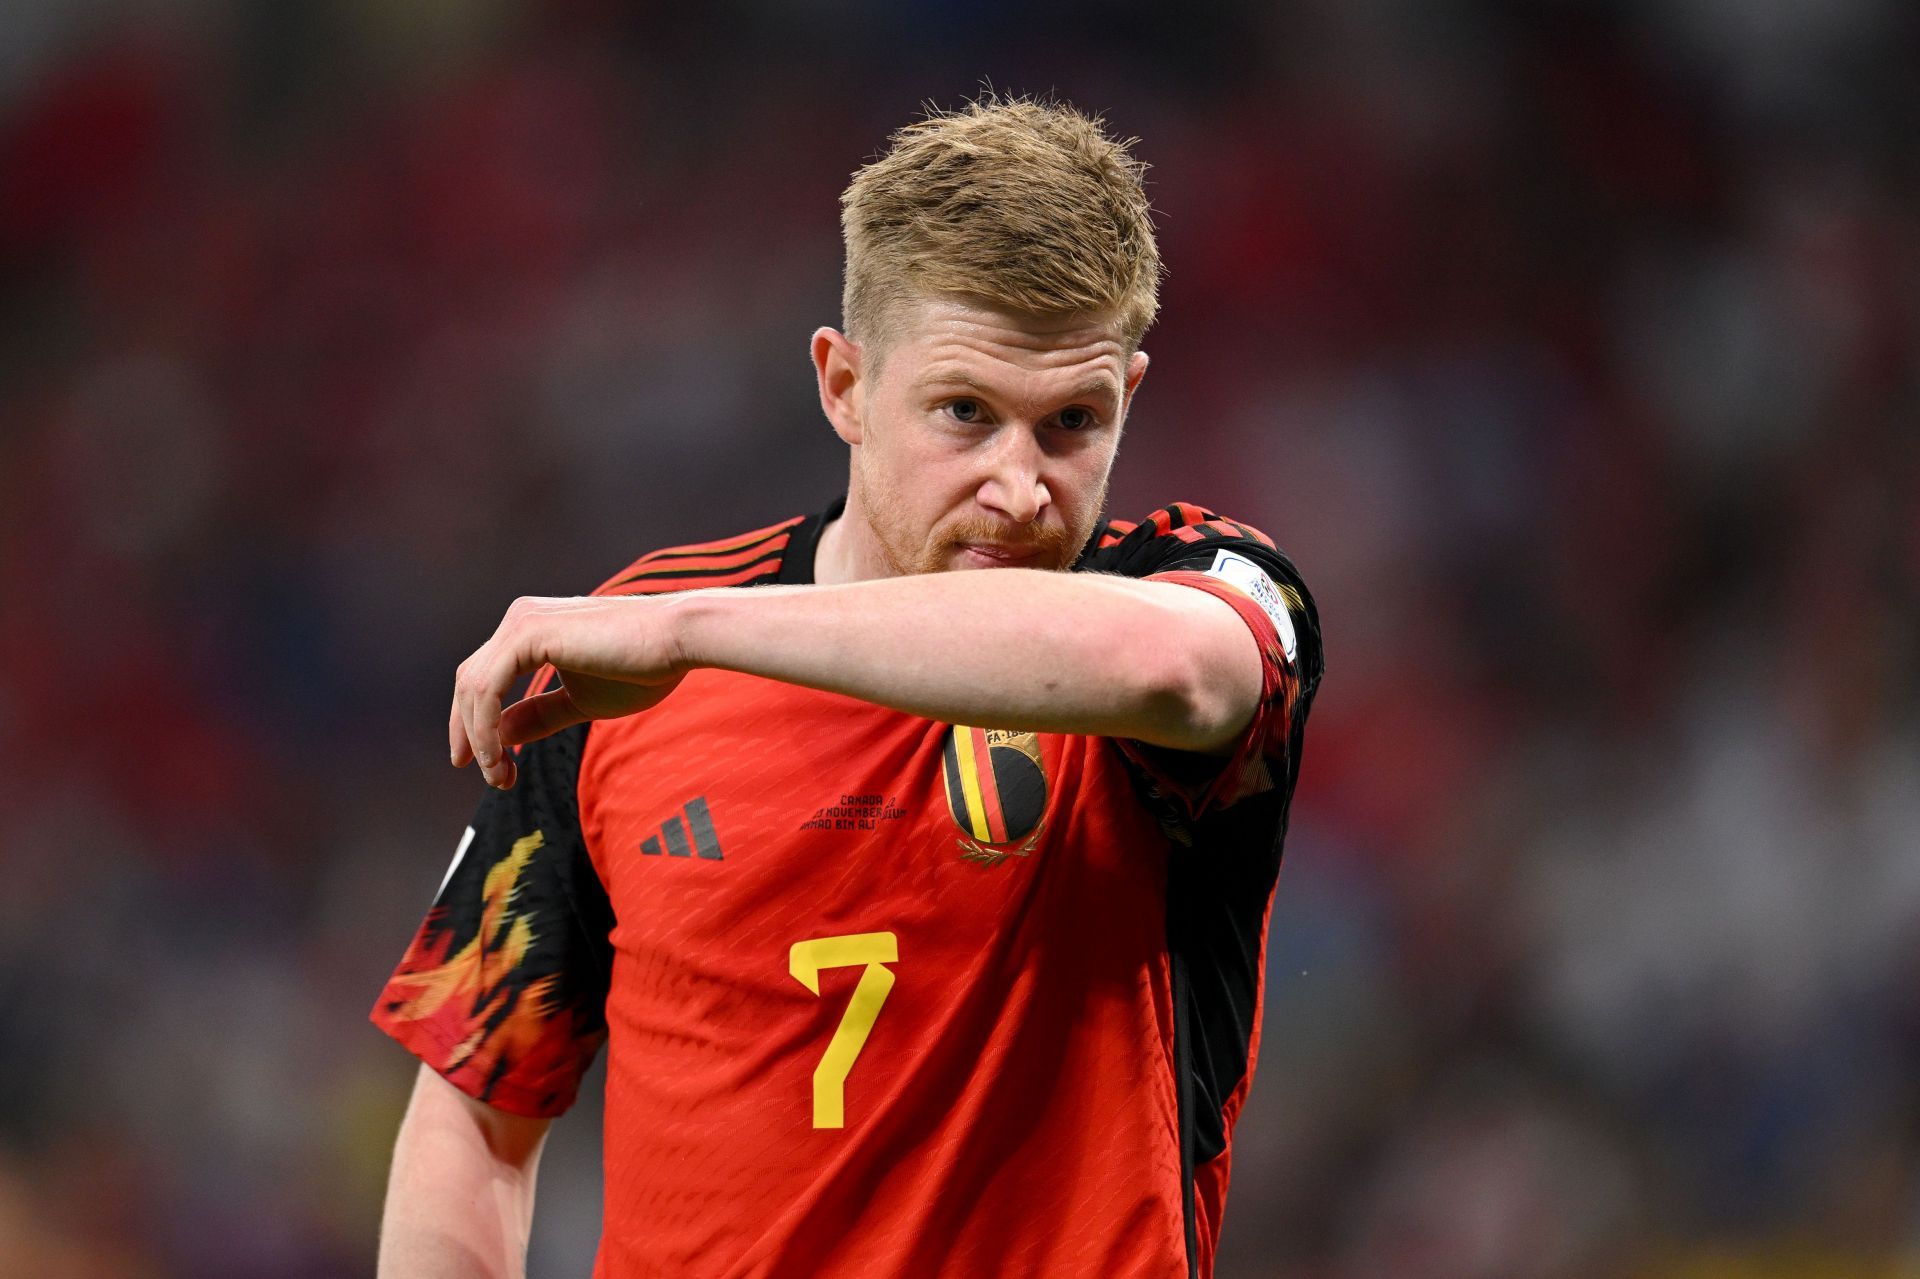 De Bruyne wants the FIFA World Cup